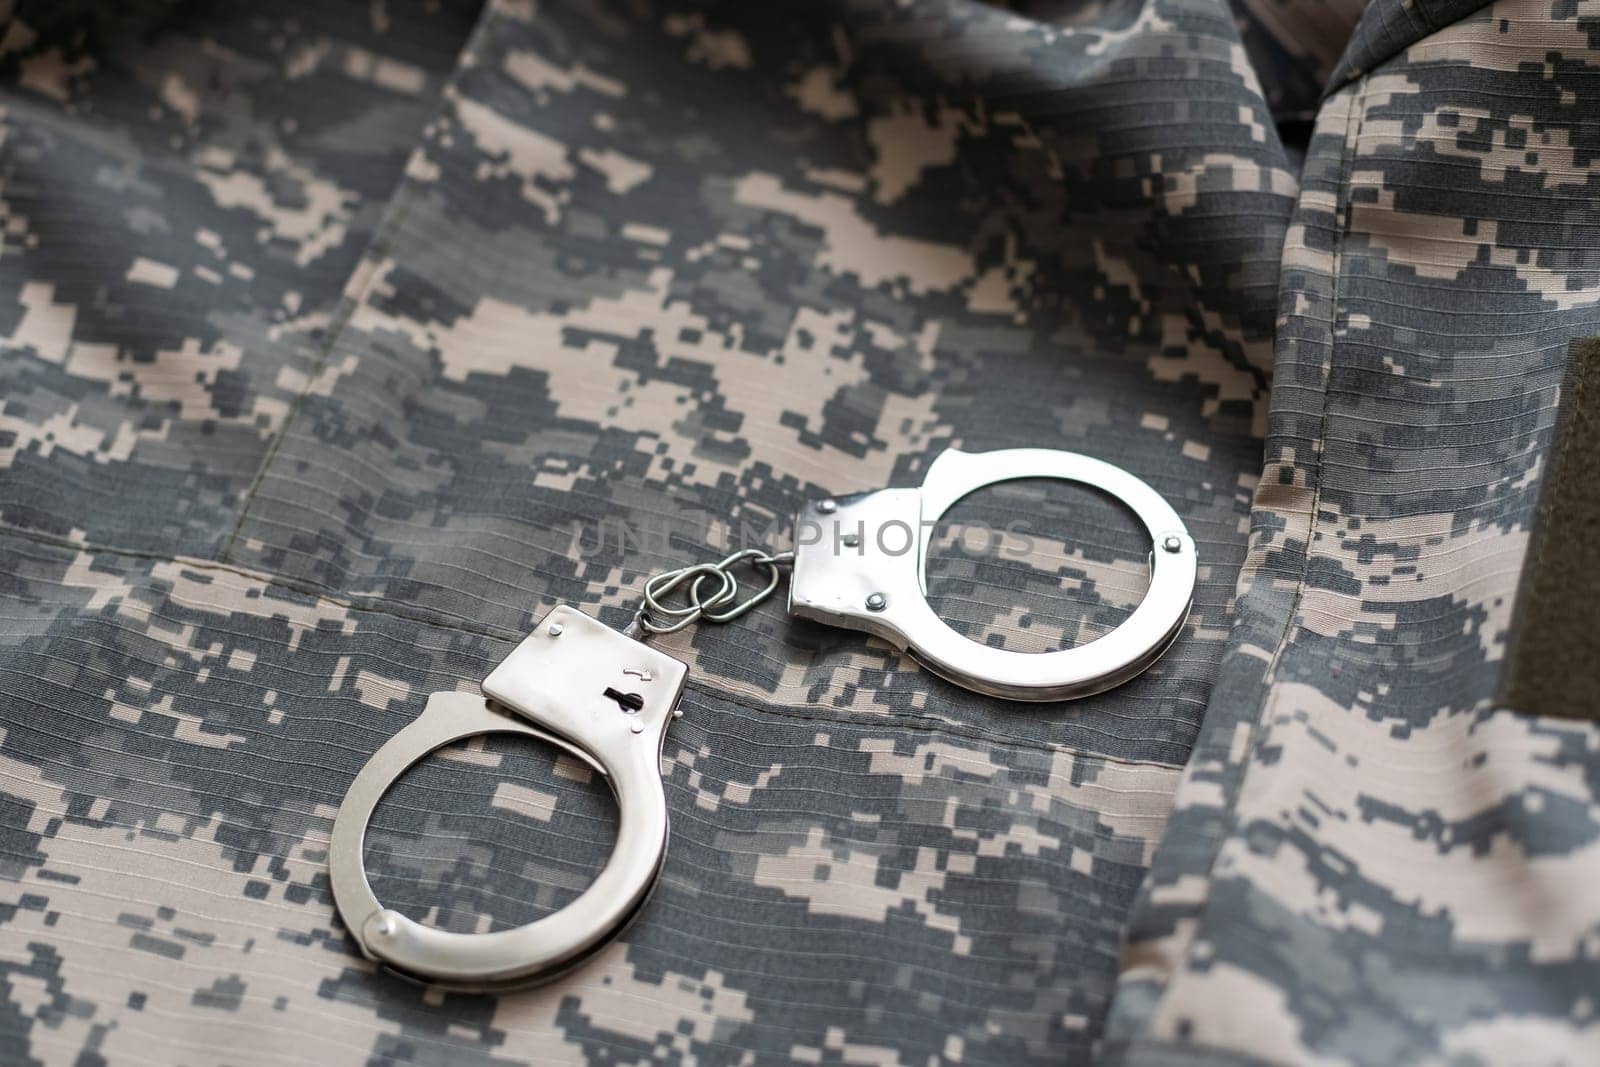 military camouflage uniform, handcuffed on background